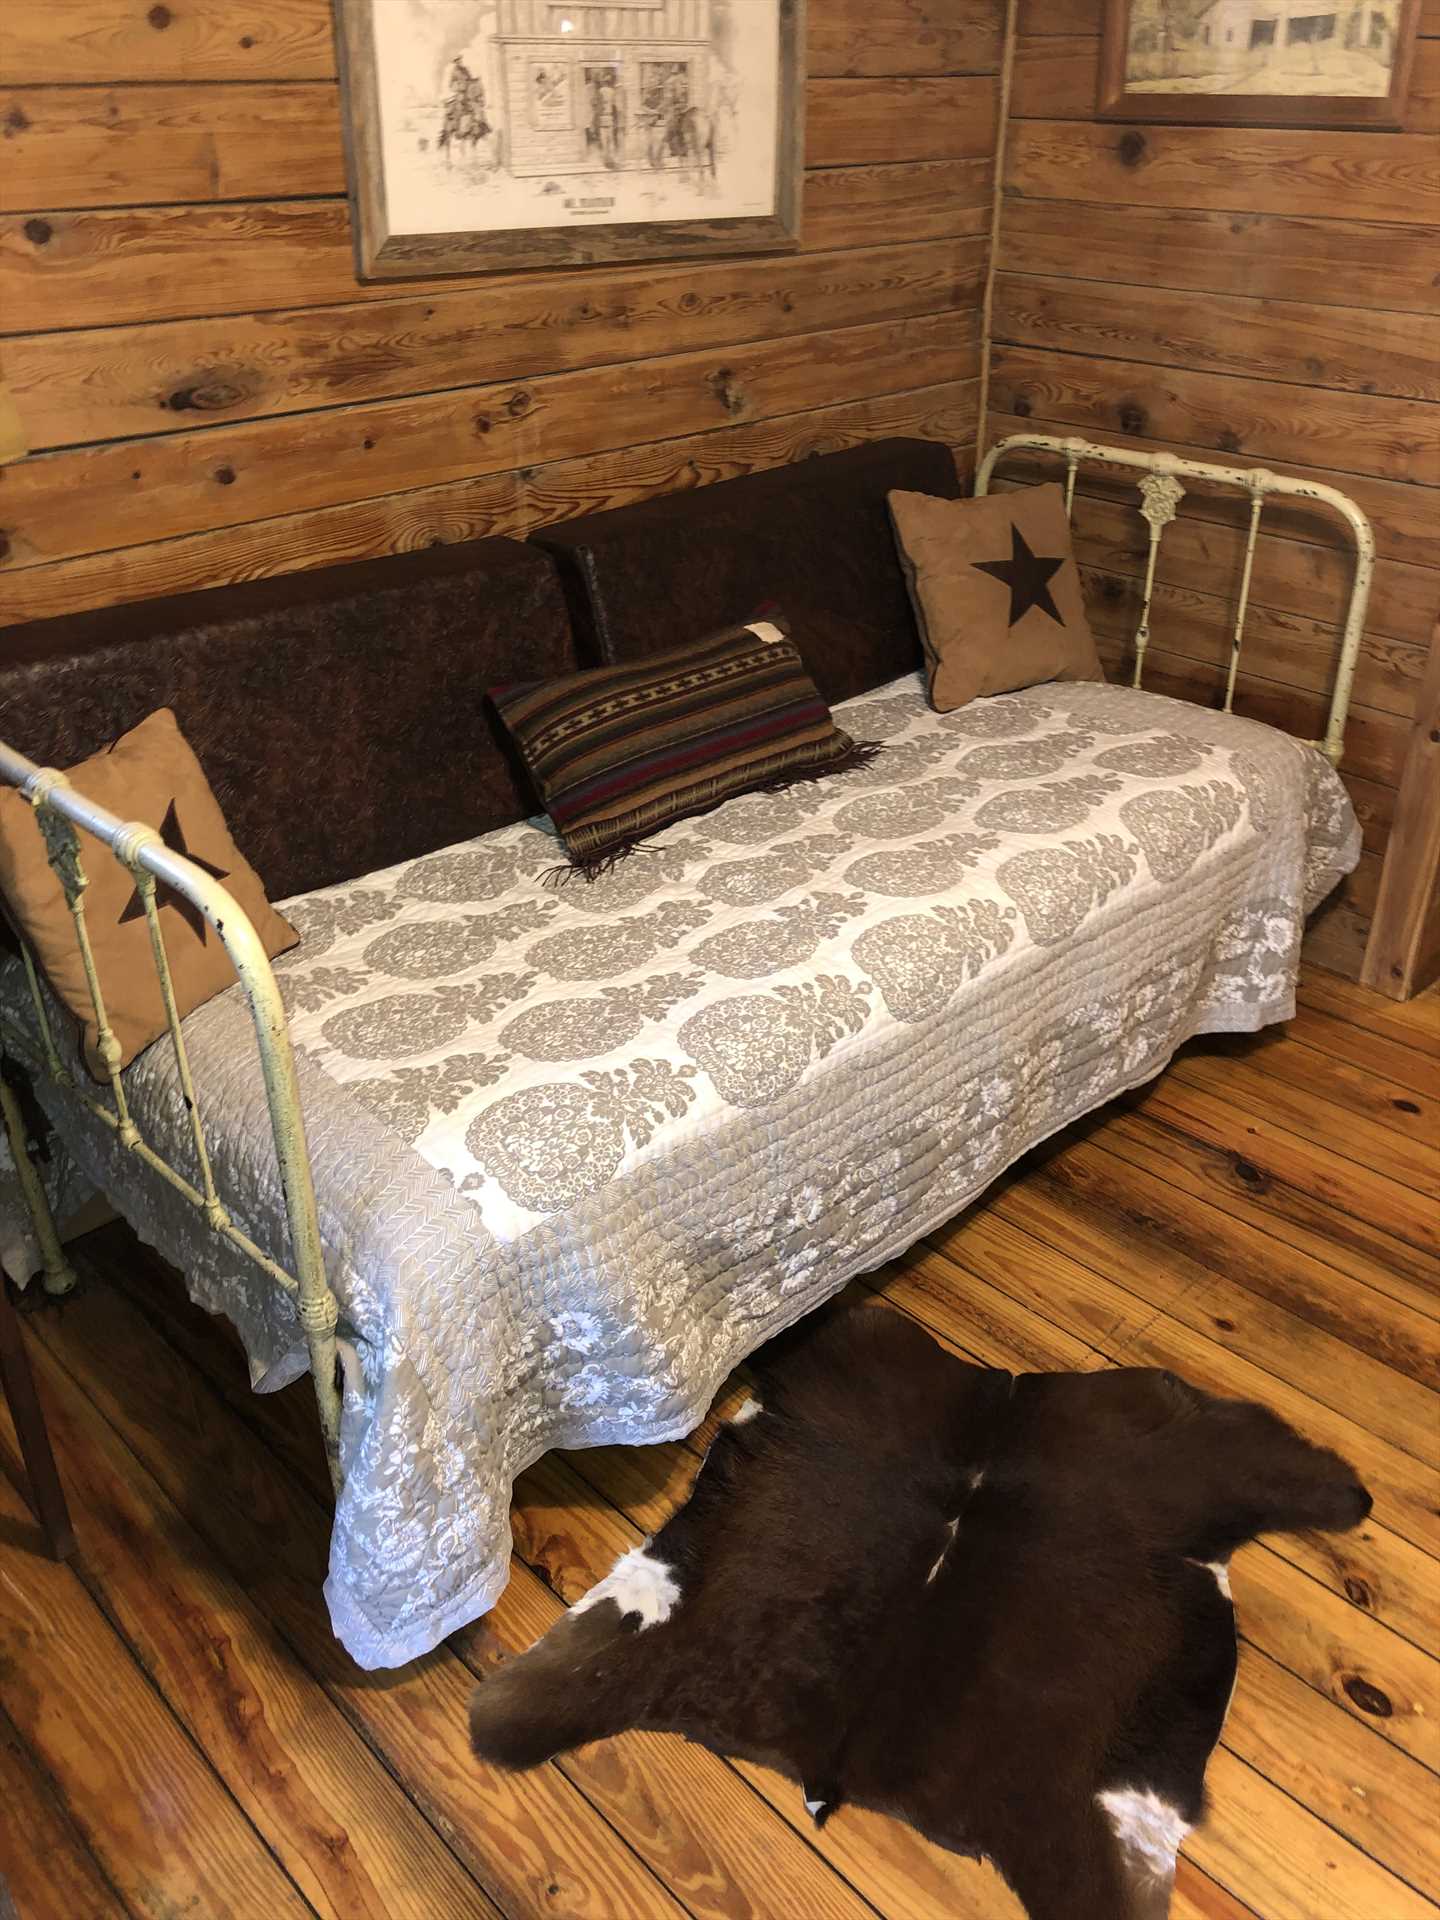                                                 This sweet little day bed rounds out the sleeping accommodations for up to three people-and all bed and bath linens are included!